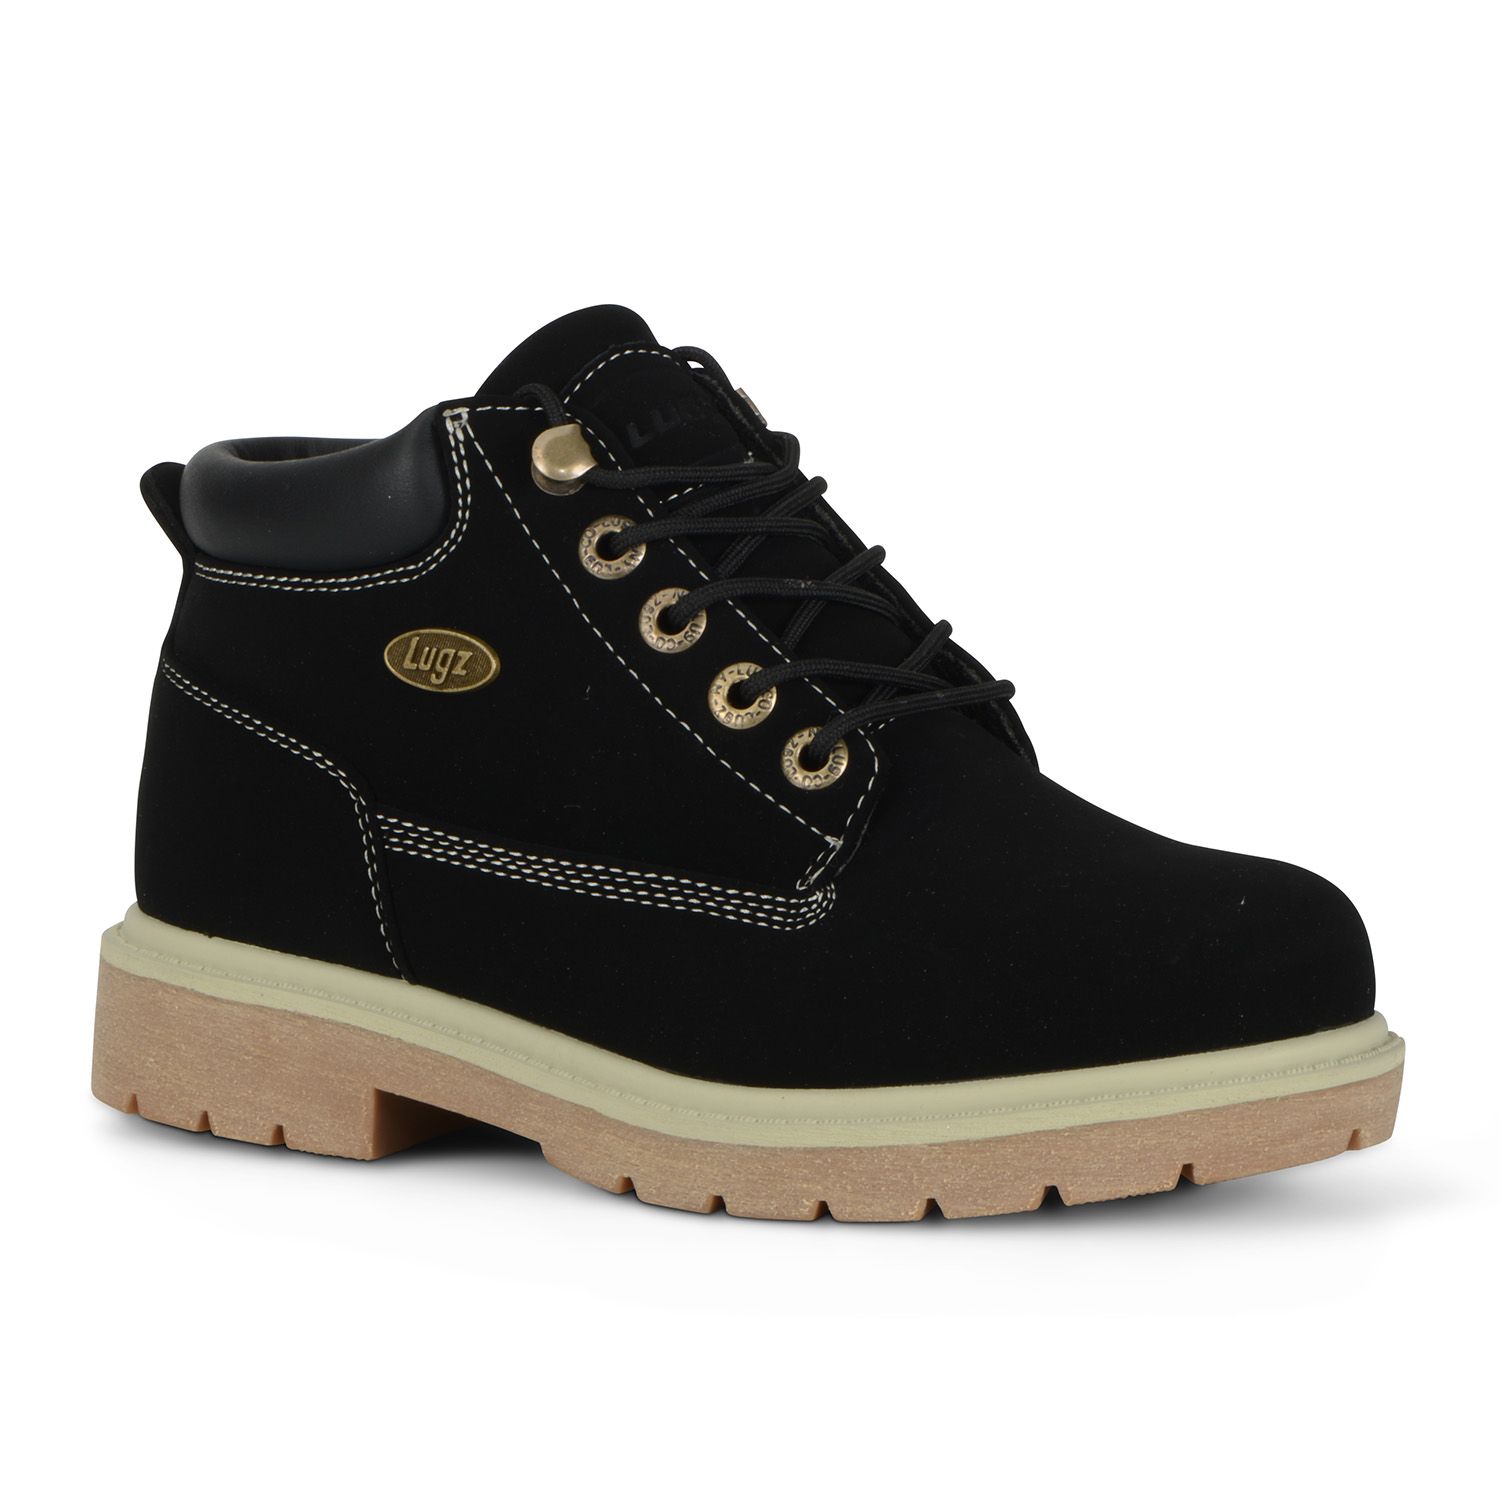 women's water resistant ankle boots